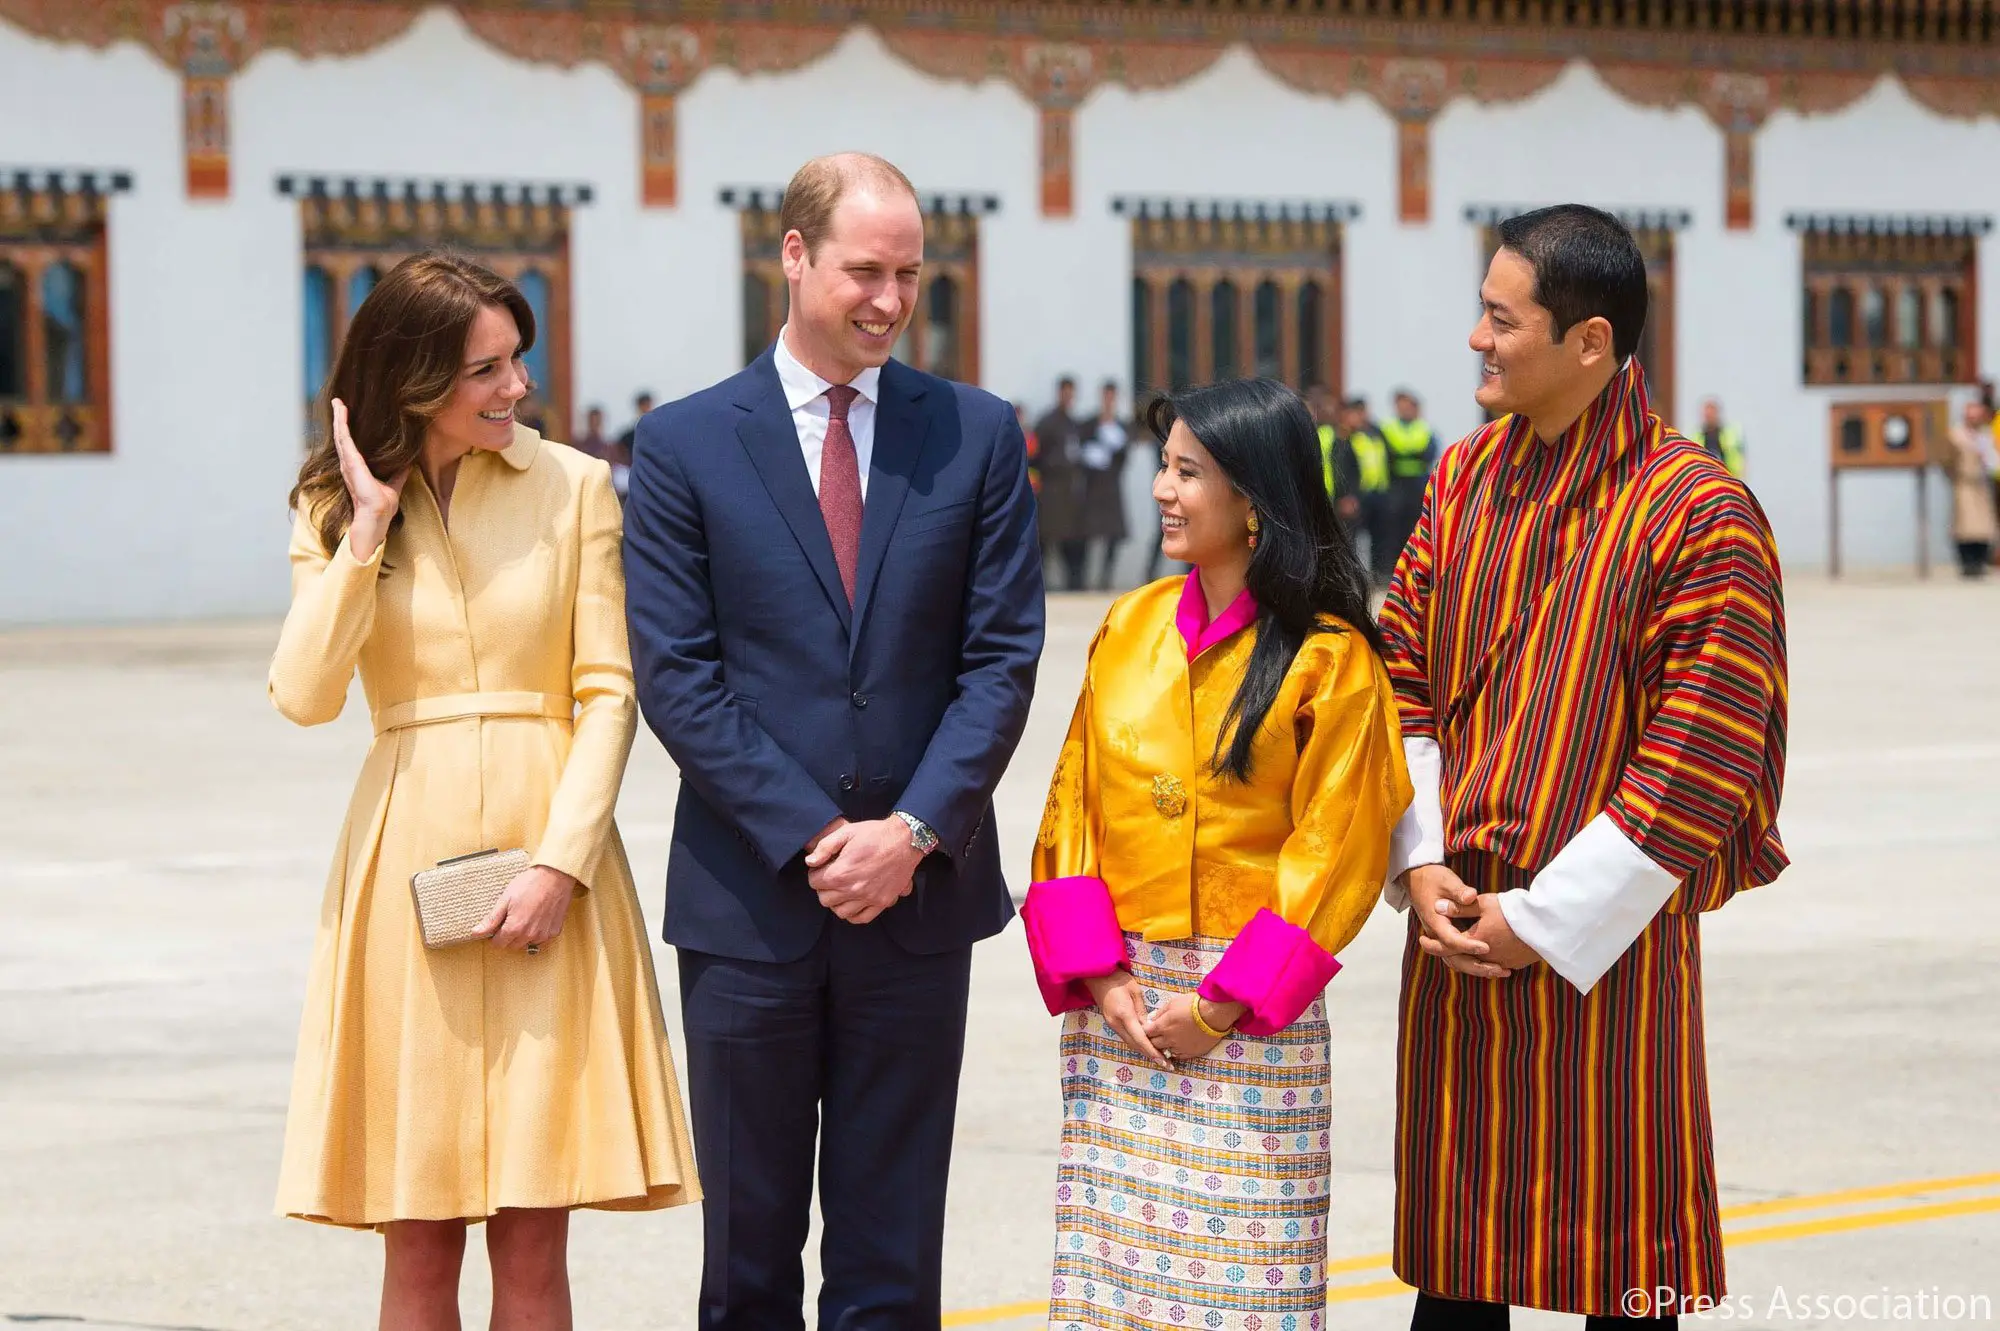 The Duke and Duchess of Cambridge arrived in Bhutan for Royal Tour in April 2016